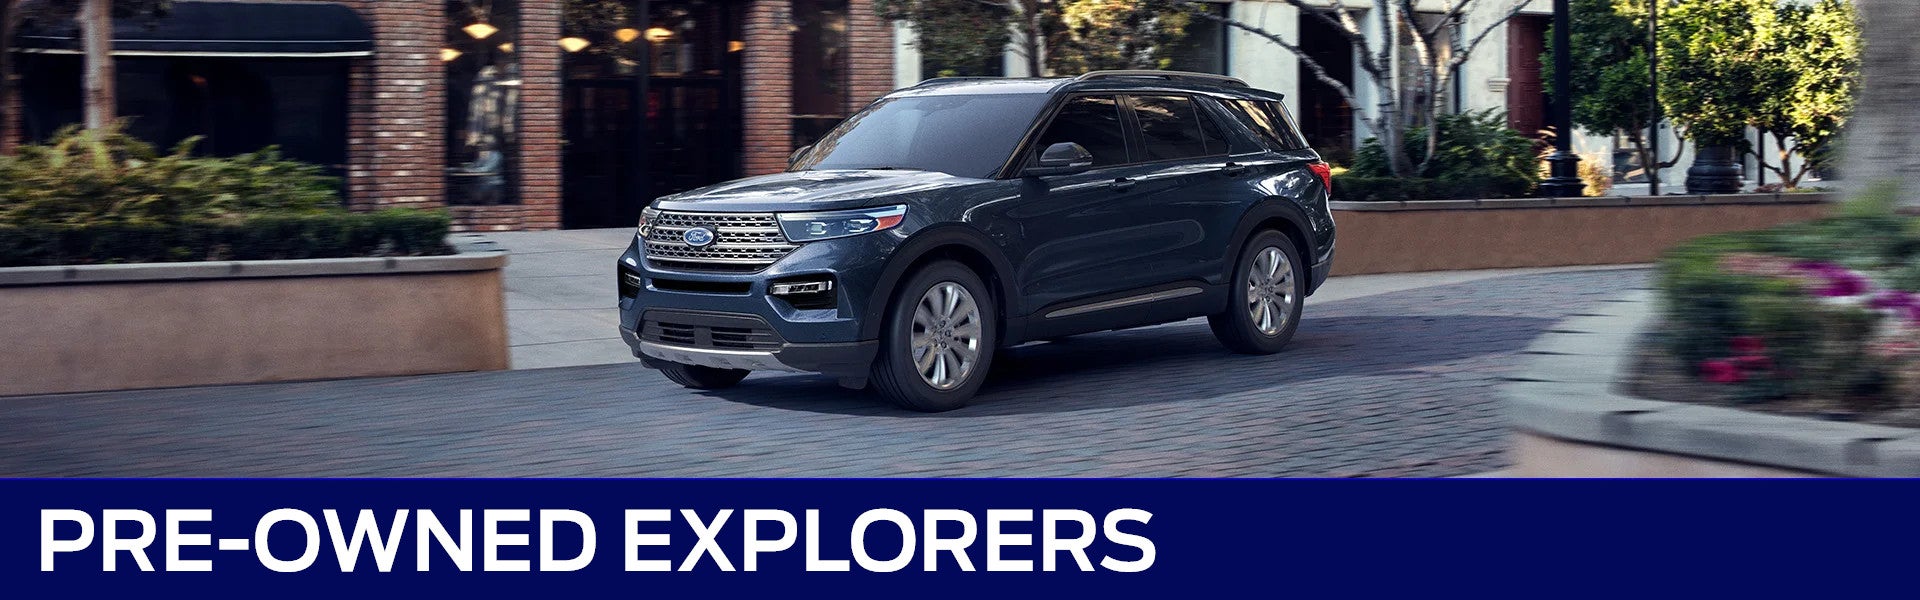 Pre-owned Explorers